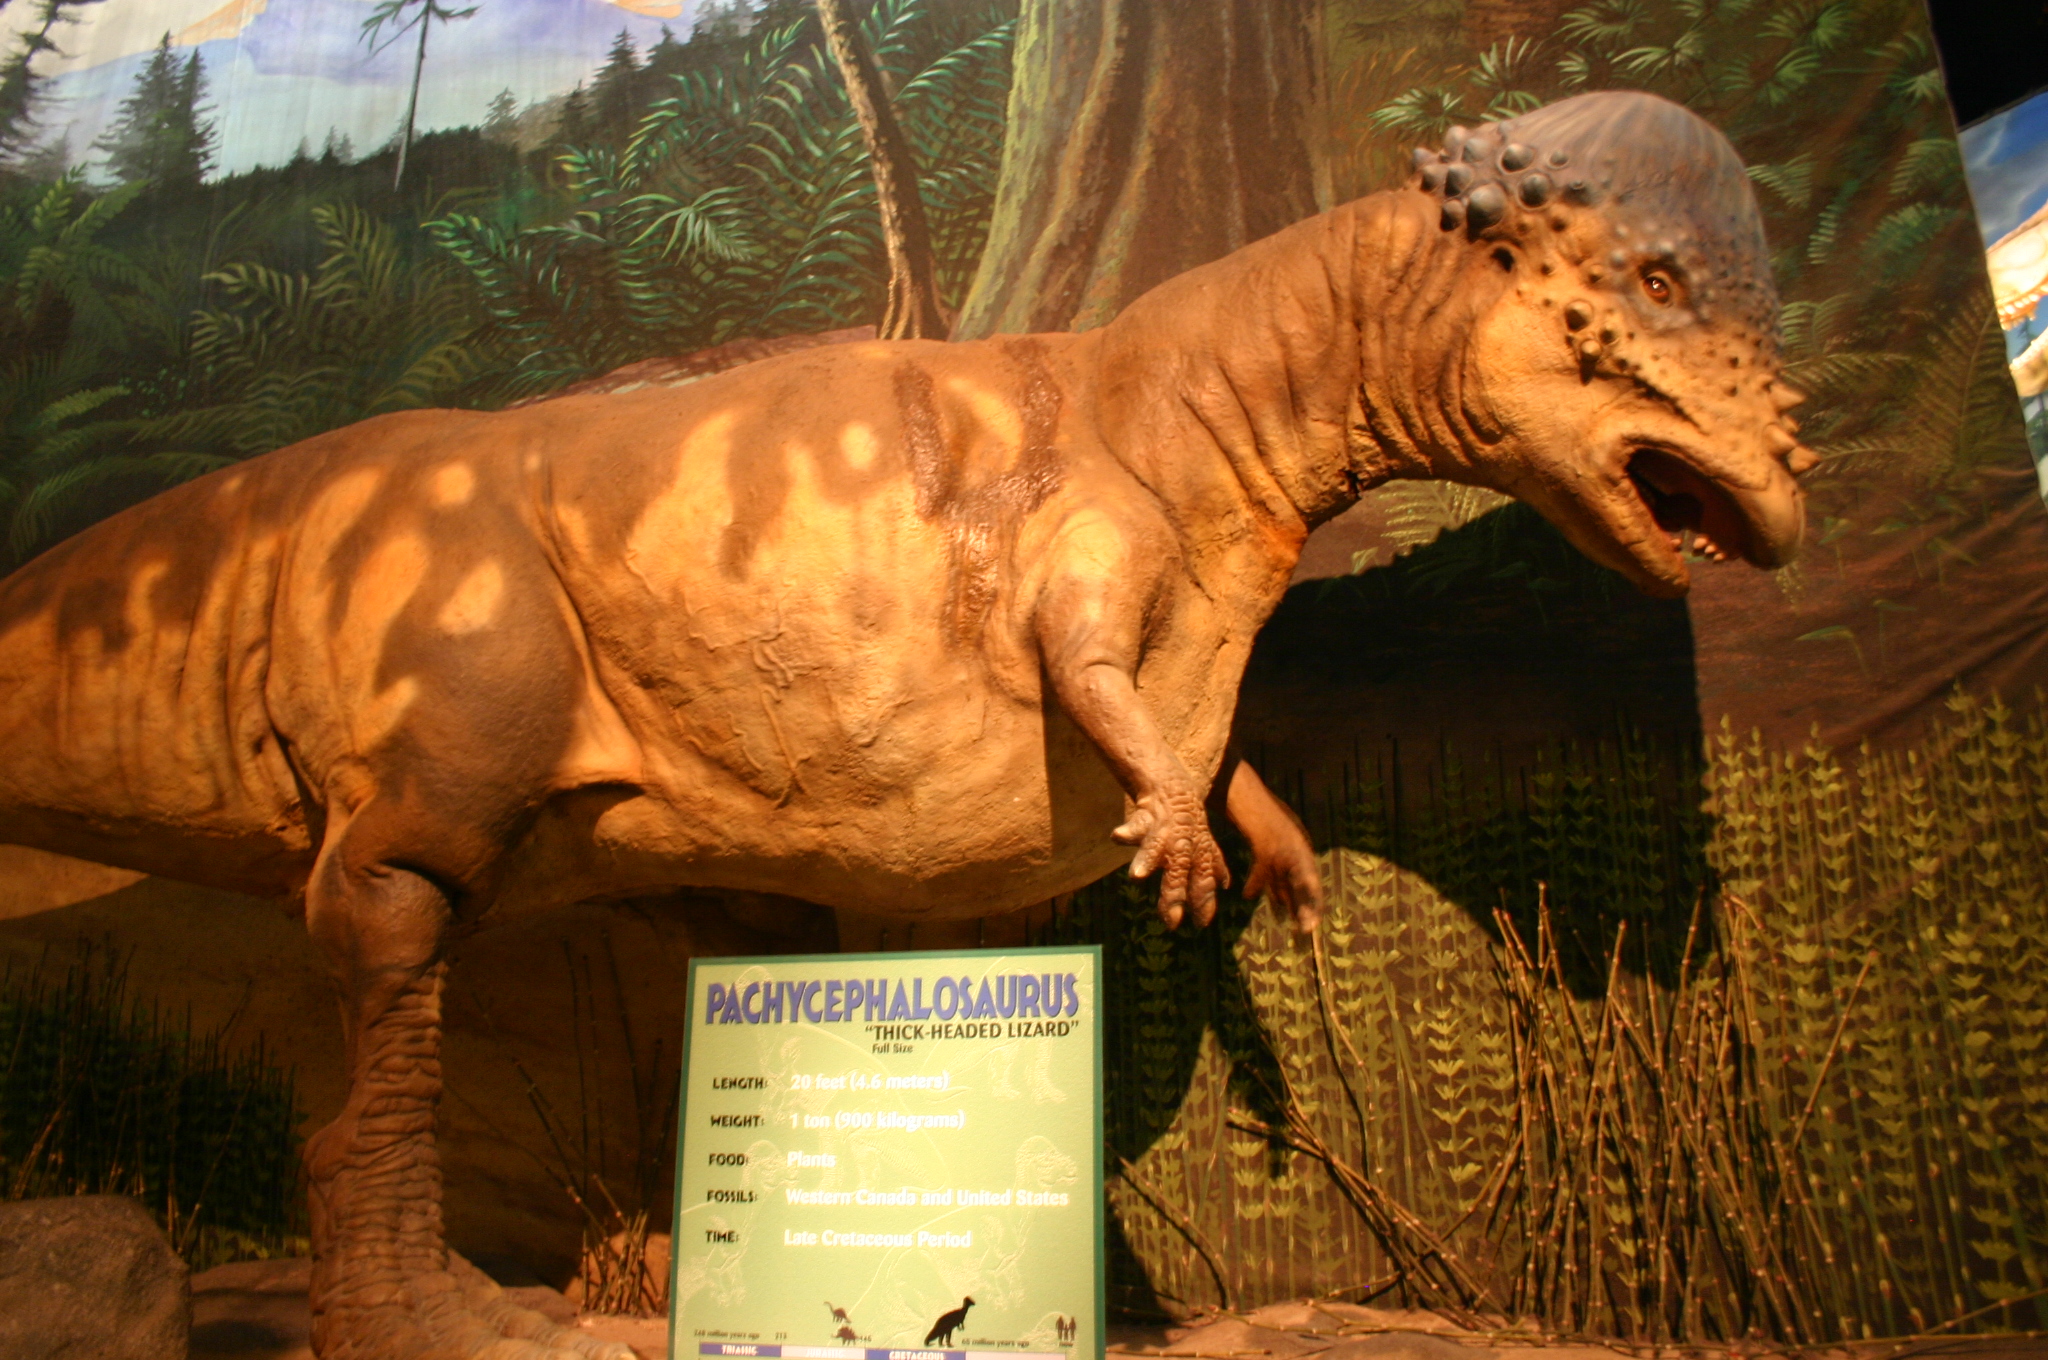 a museum display of a sterataur and dinosaur exhibit